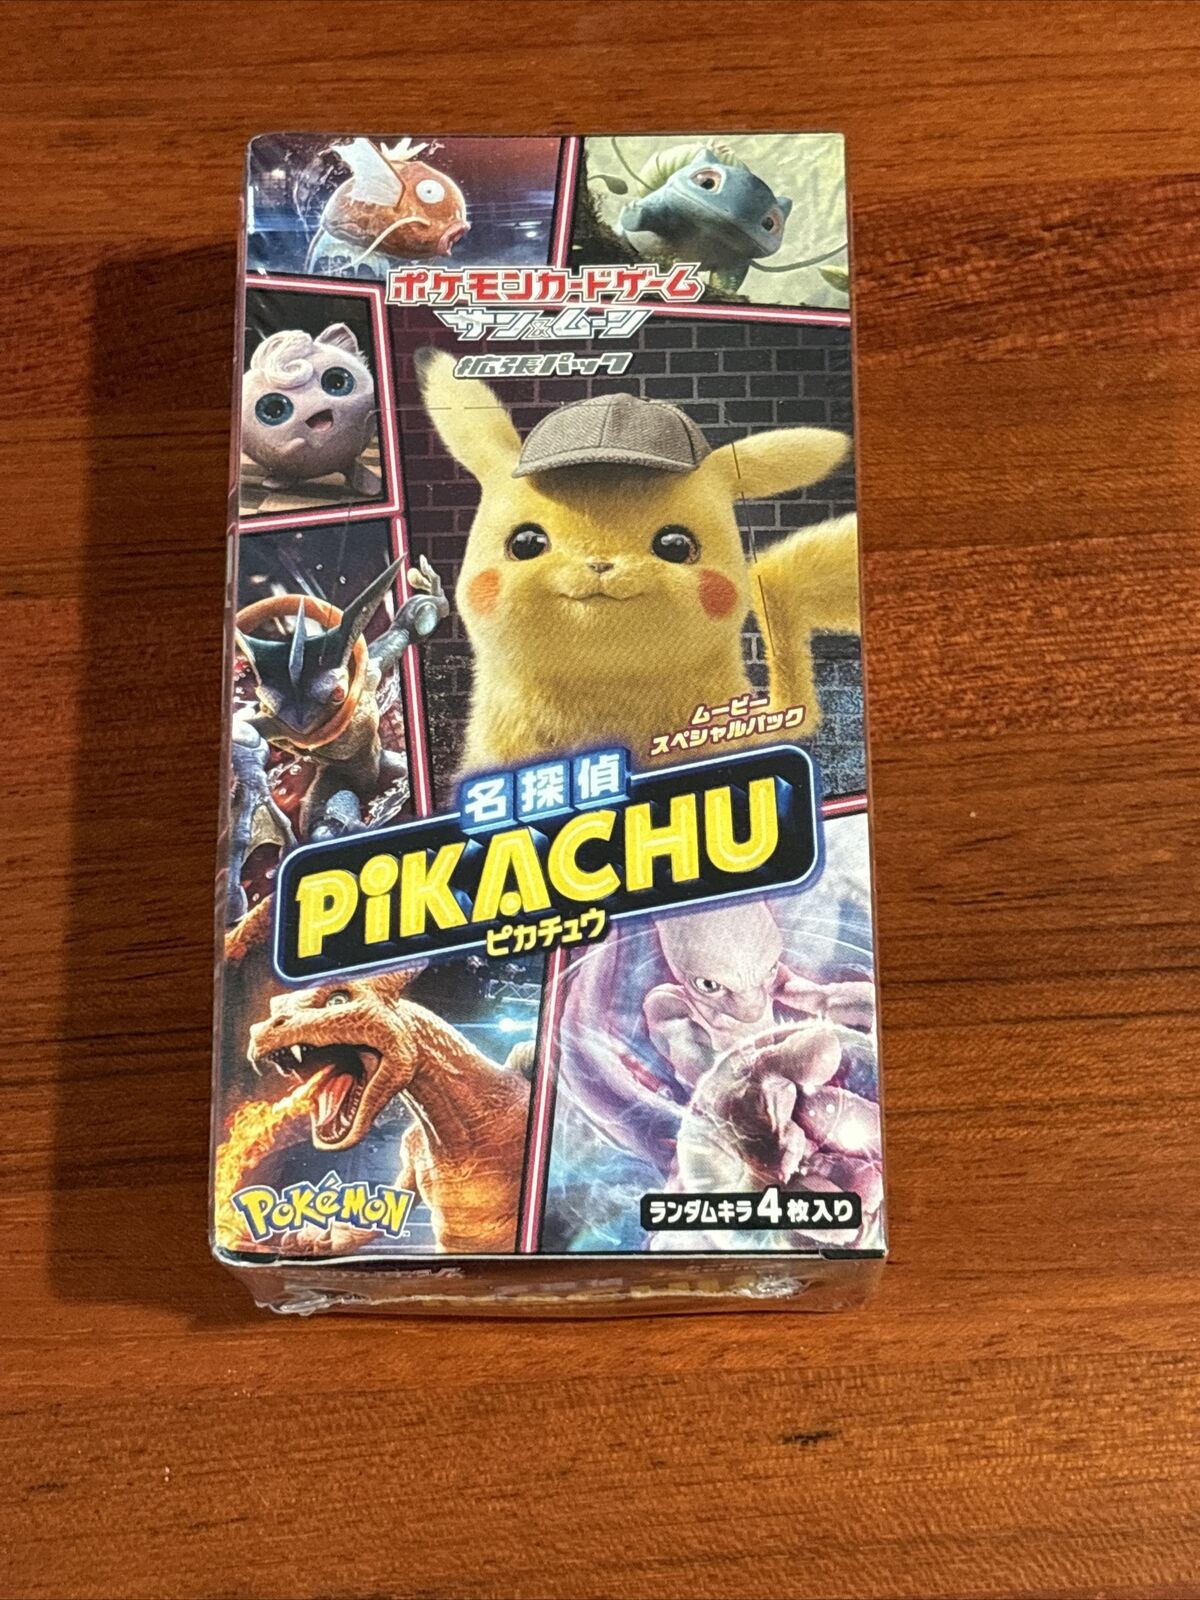 Pokemon Card Game Detective Pikachu SMP2 Sun & Moon Movie Special Pack BOX Japan